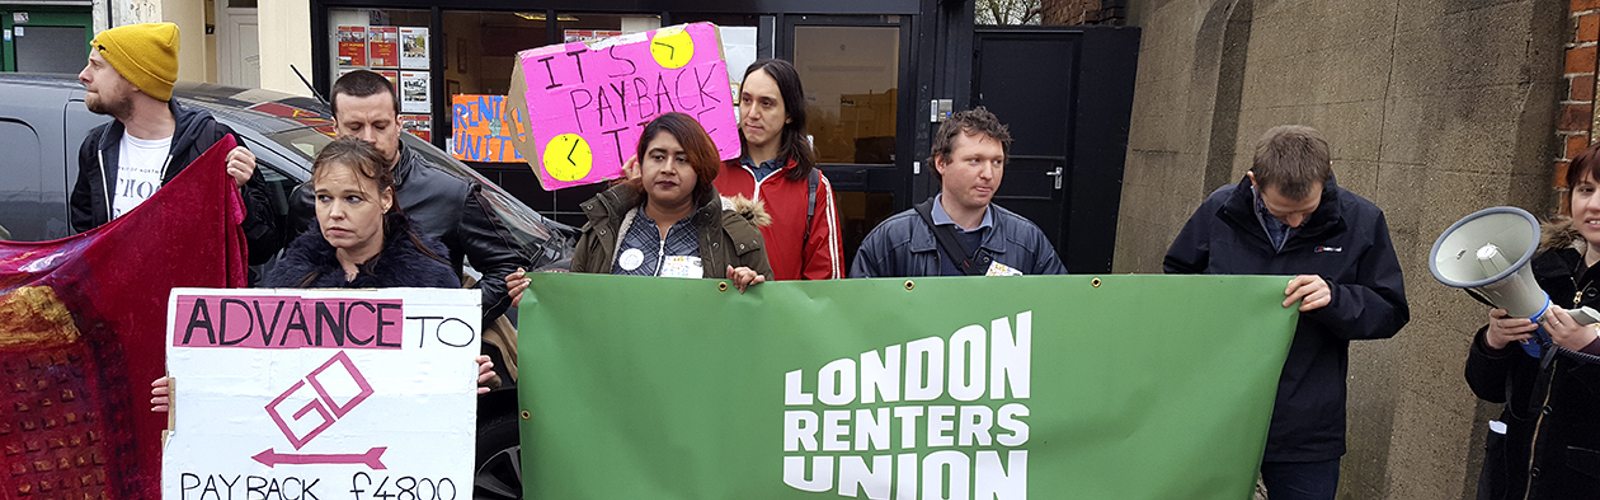 London Renters Union protesters 